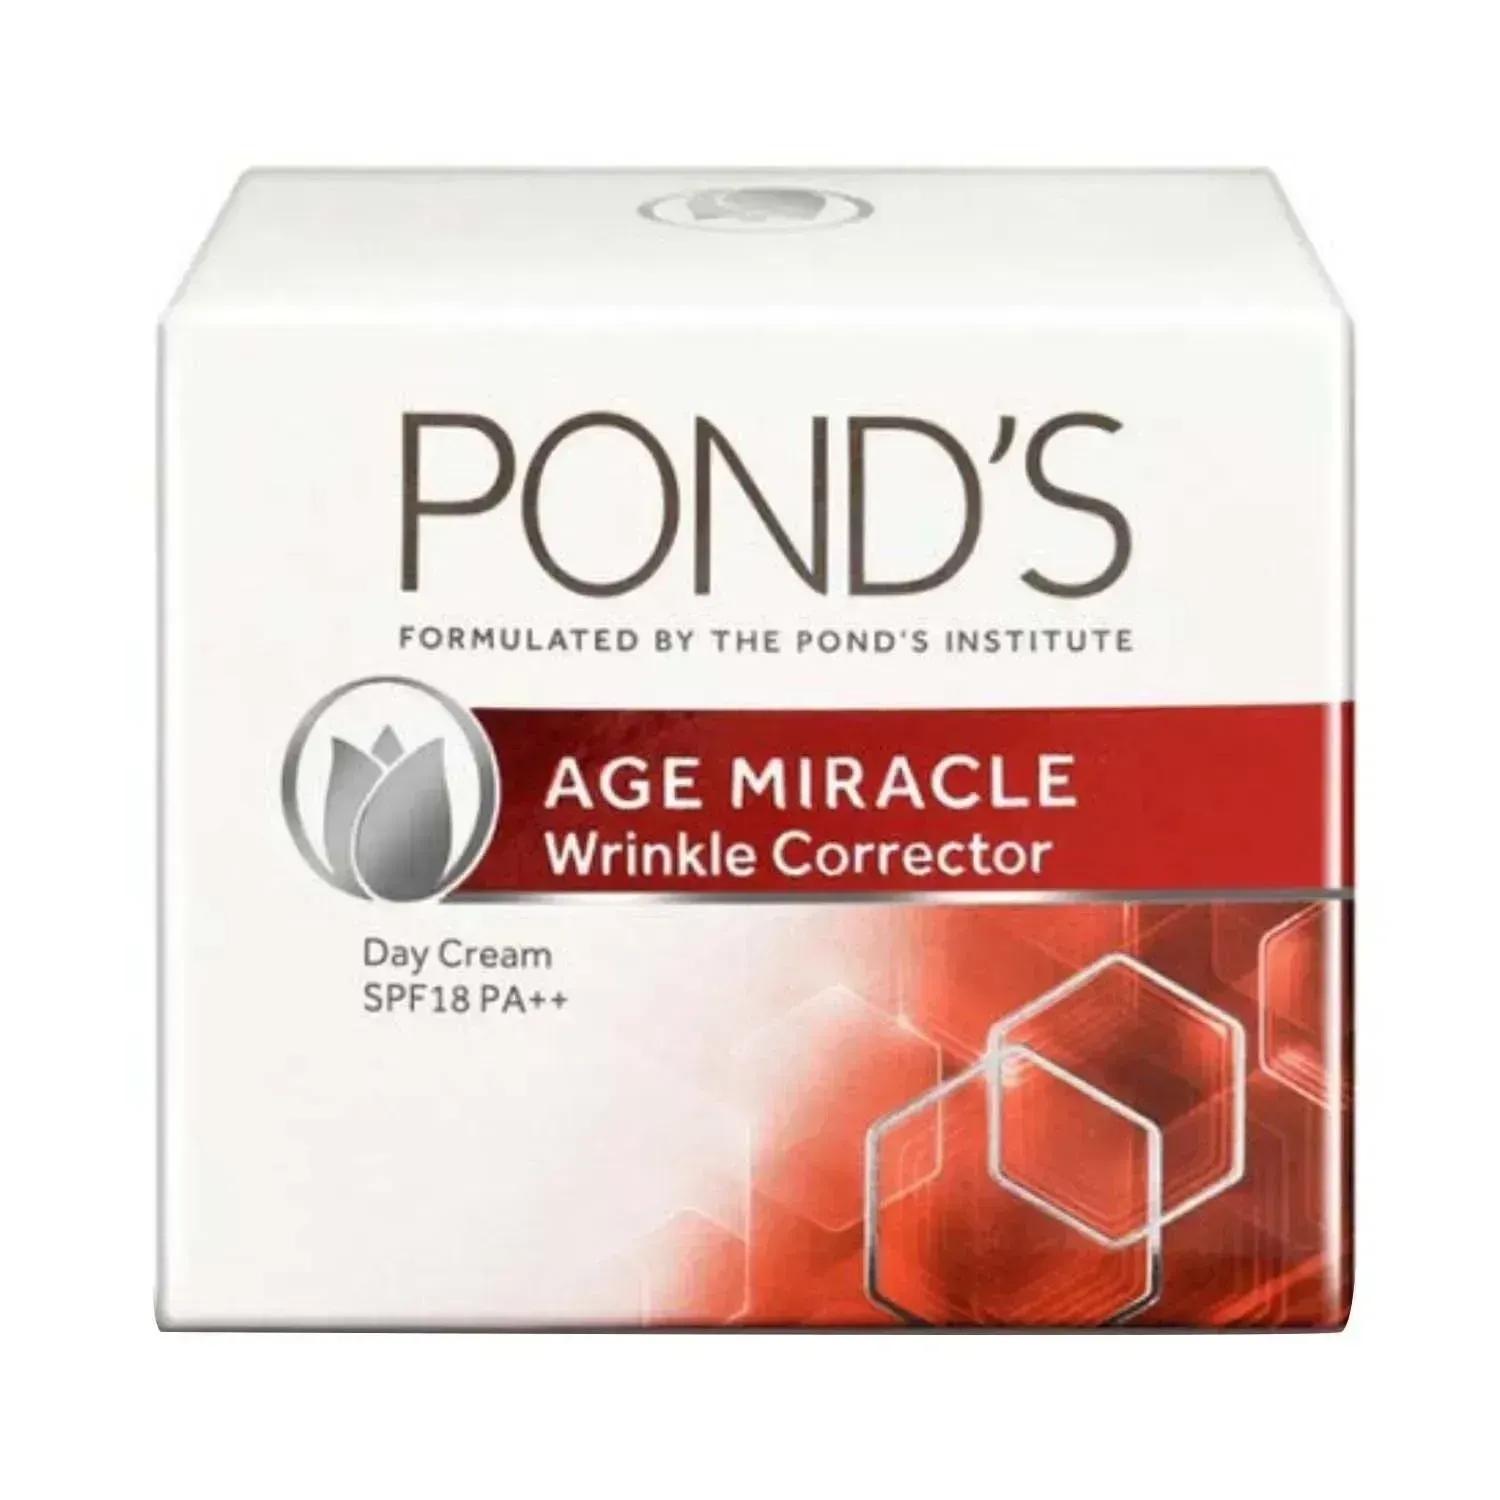 pond's age miracle wrinkle corrector day cream spf 18 pa++ (35g)